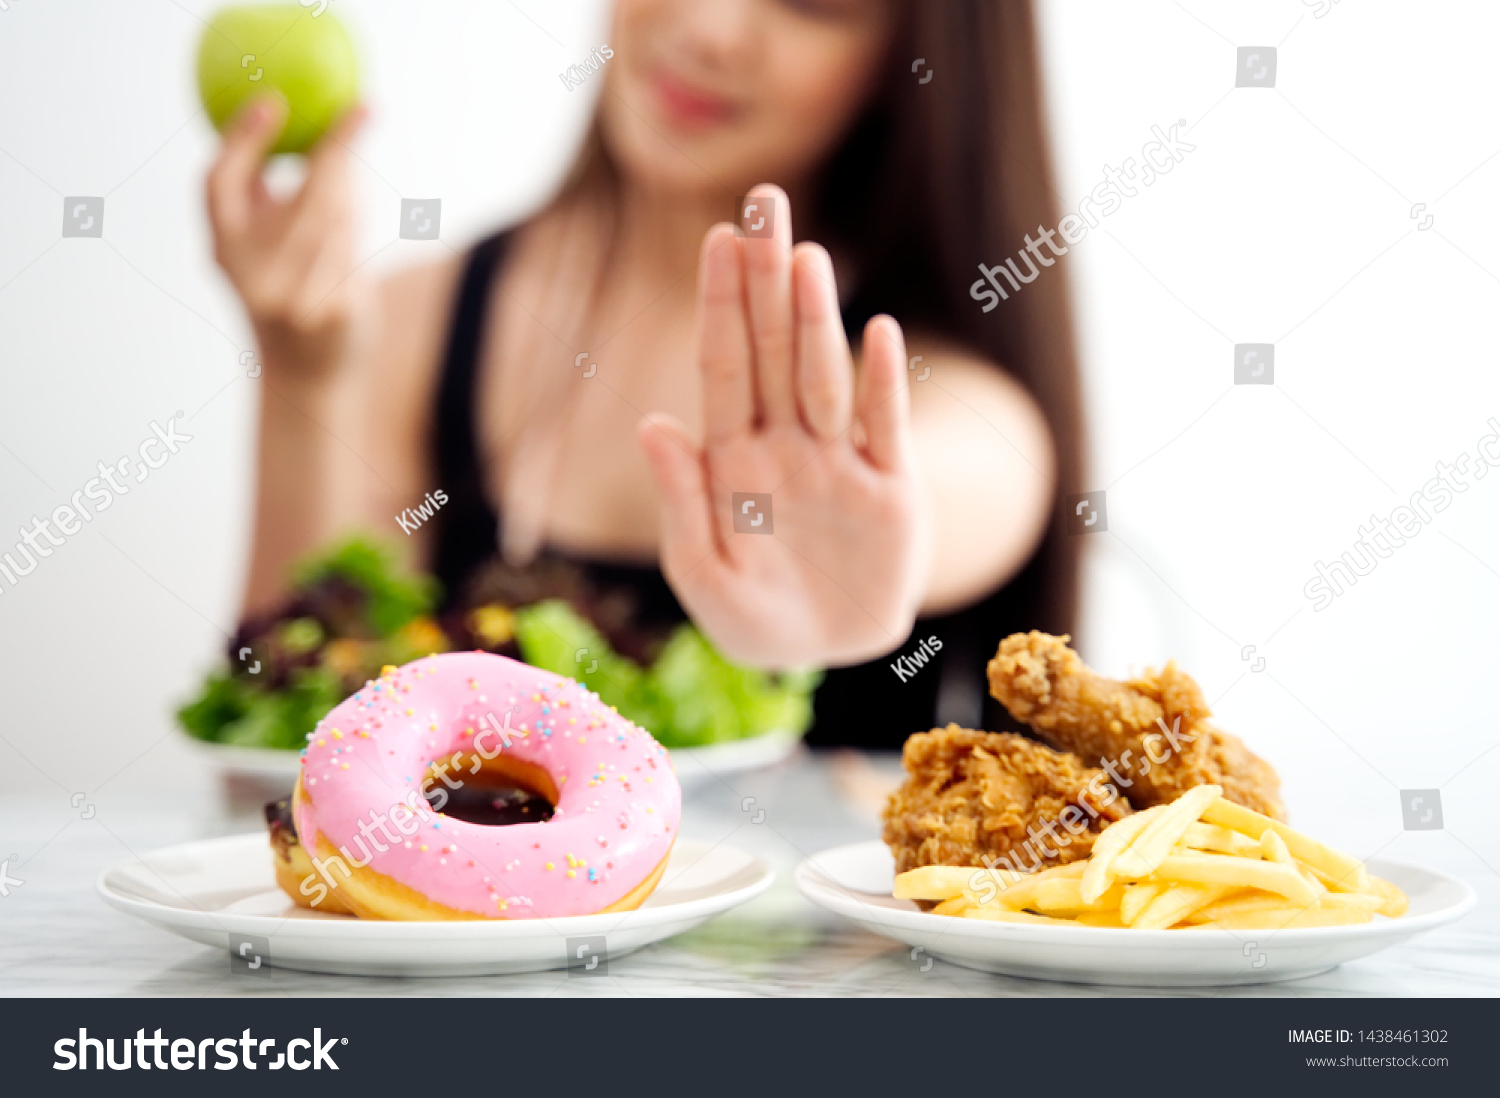 Young girl on dieting for good health concept. Close up female using hand reject junk food by pushing out her favorite sweet donuts and fried chicken and choose green apple and salad for good health. #1438461302